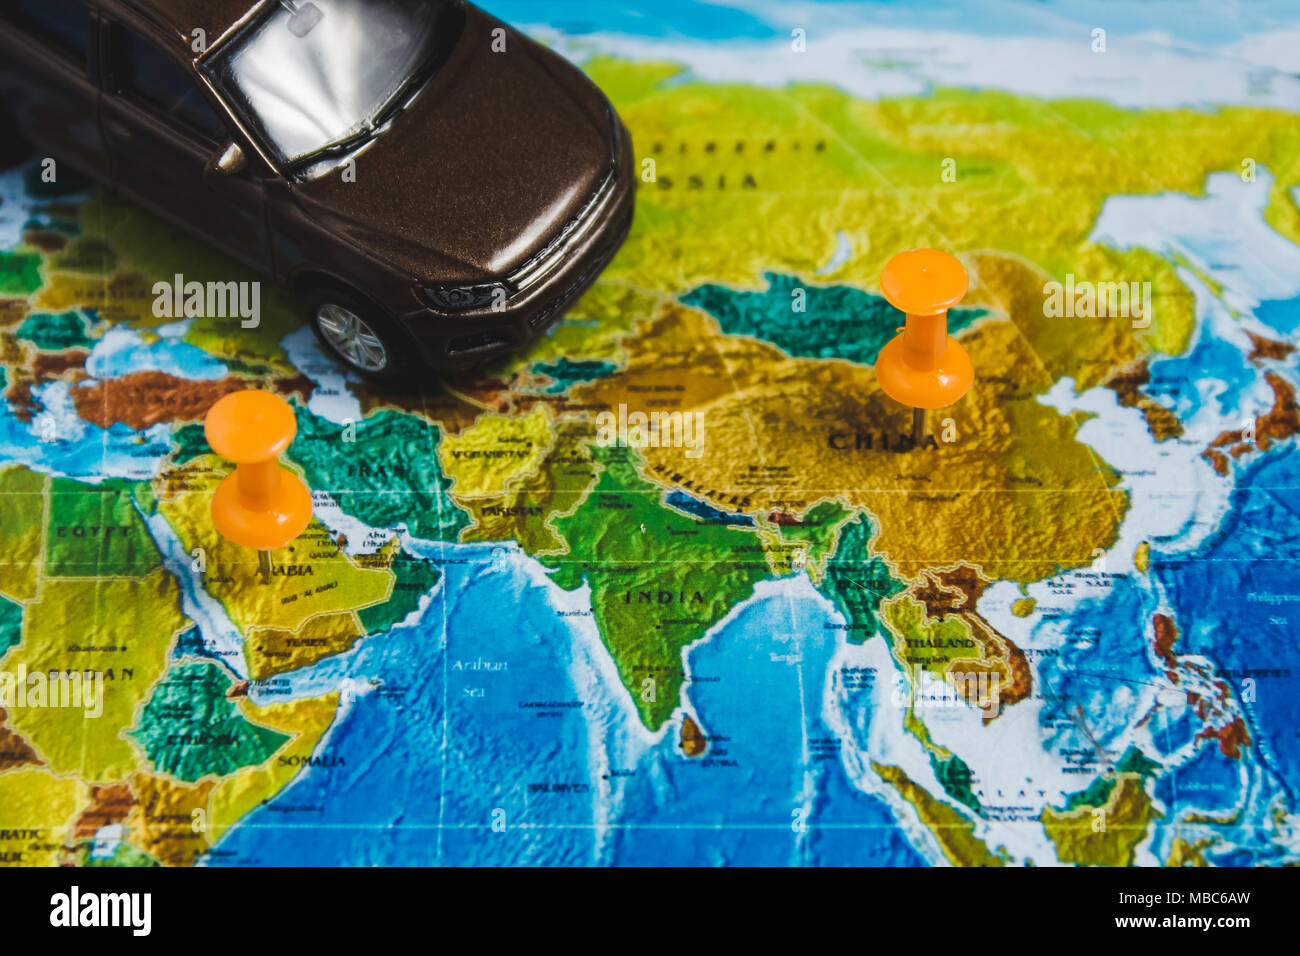 Automotive Travel Destination Points on World Map Indicated with Colorful Thumbtacks and Shallow Depth of Field Stock Photo